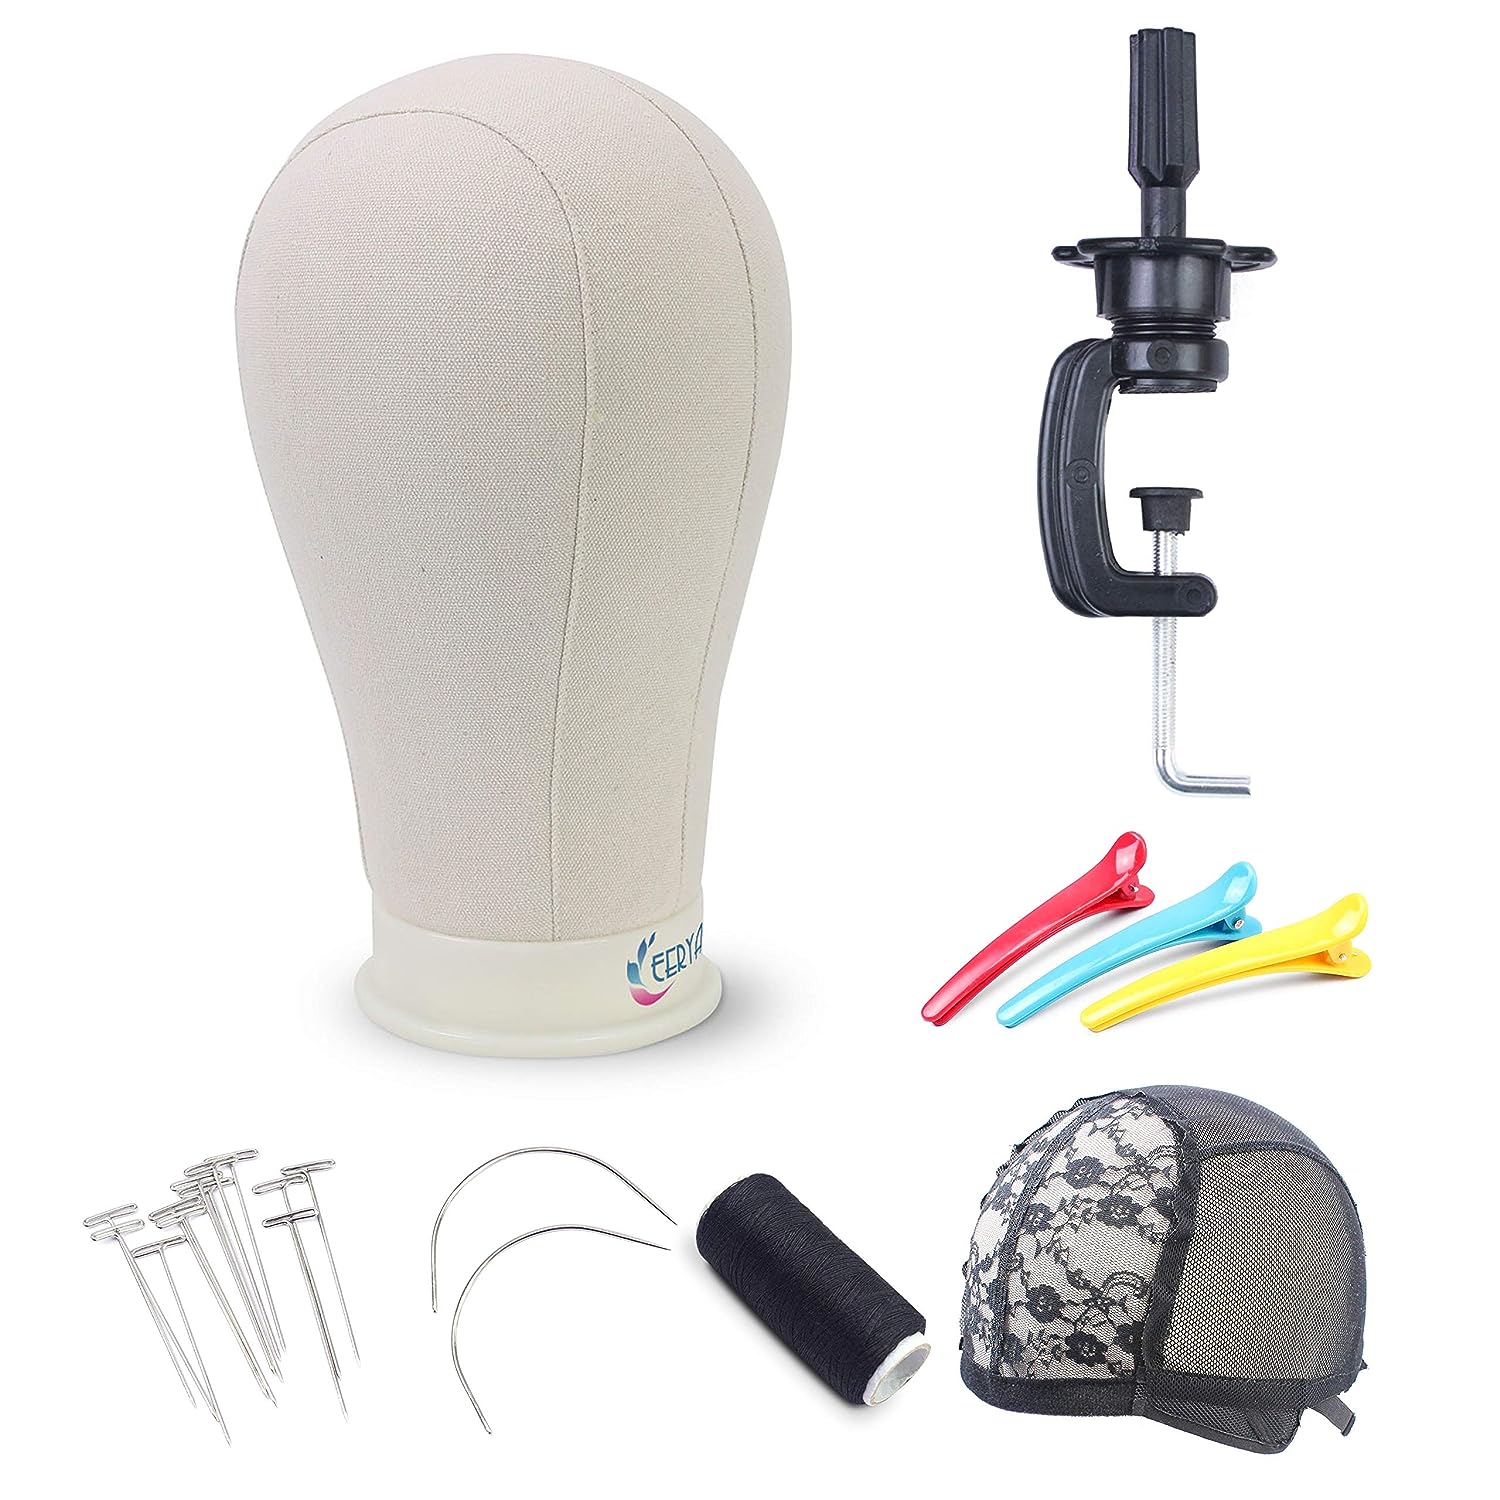  GEX 22 Canvas Cork Wig Head with 55 Mannequin Tripod